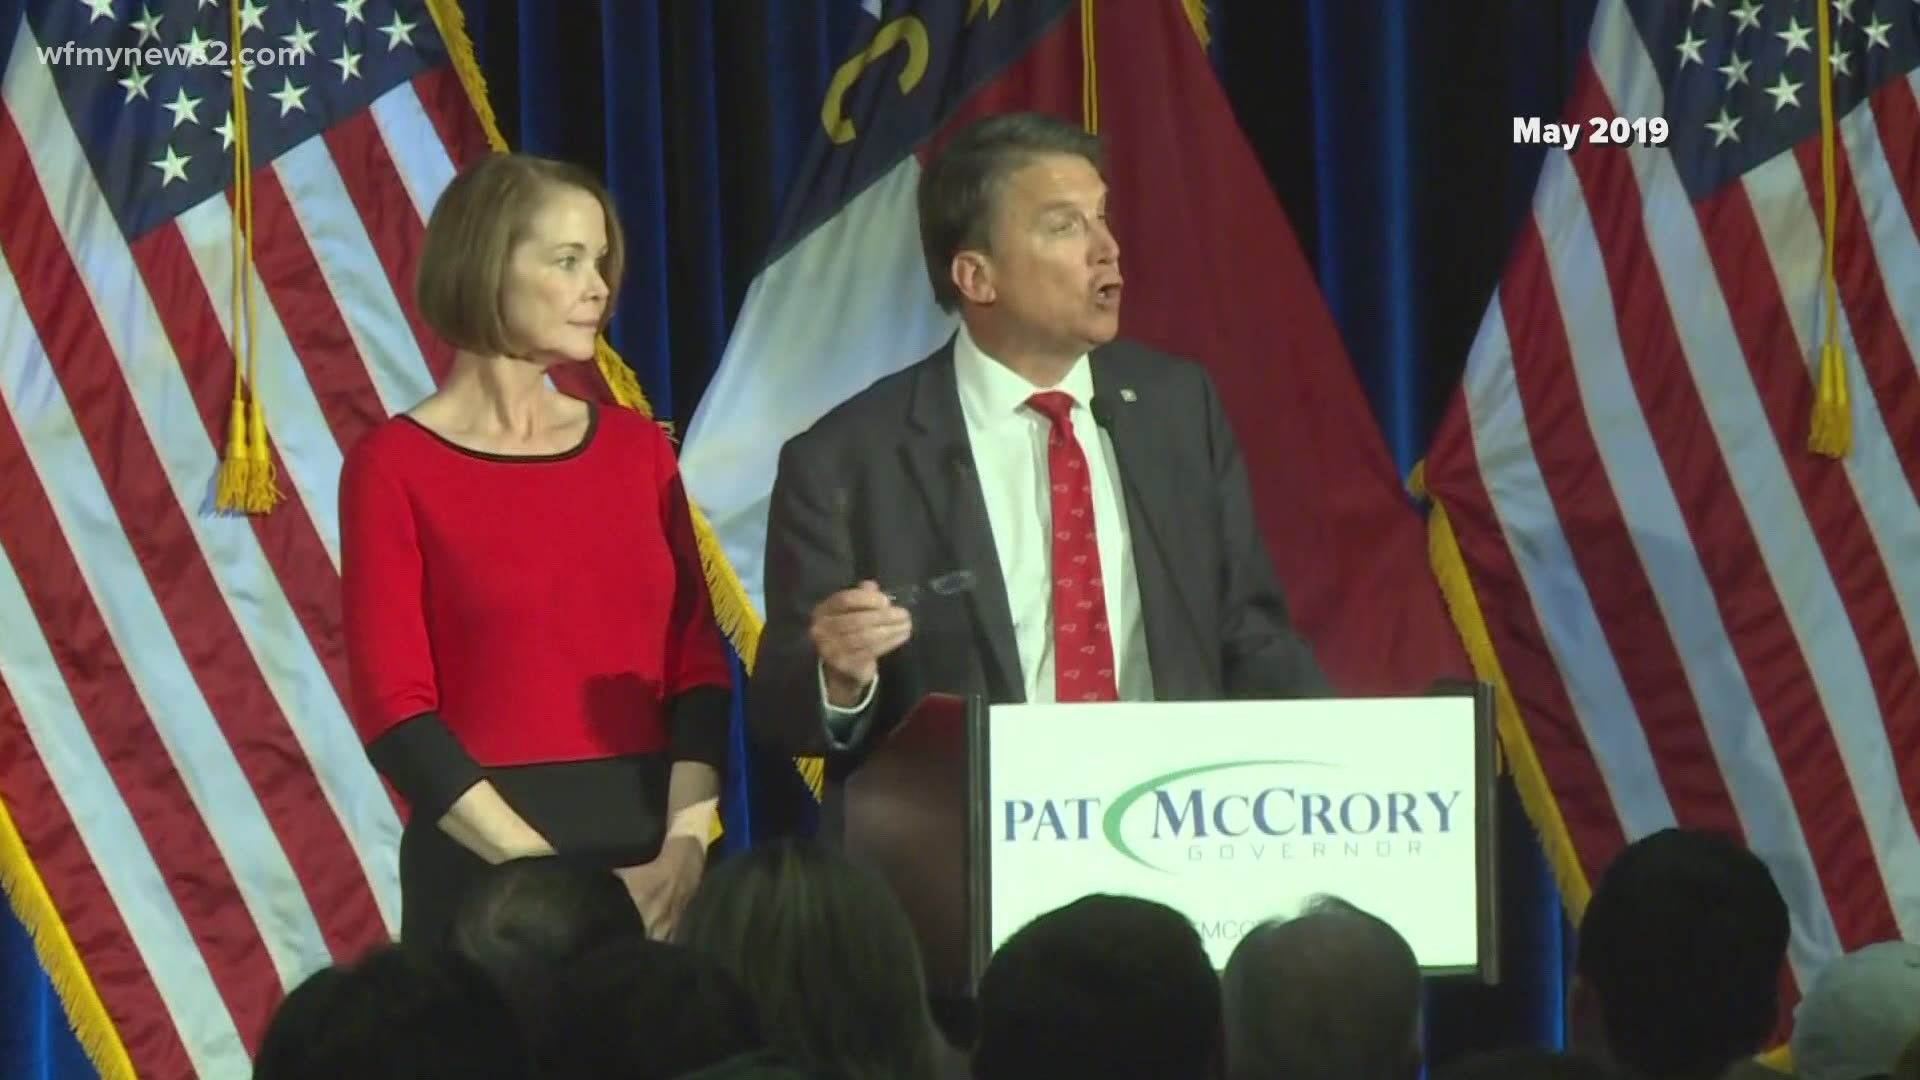 Pat McCrory lost re-election for NC governor in 2016 by just 10,000 votes. He hopes Republican unity propels him to Congress.